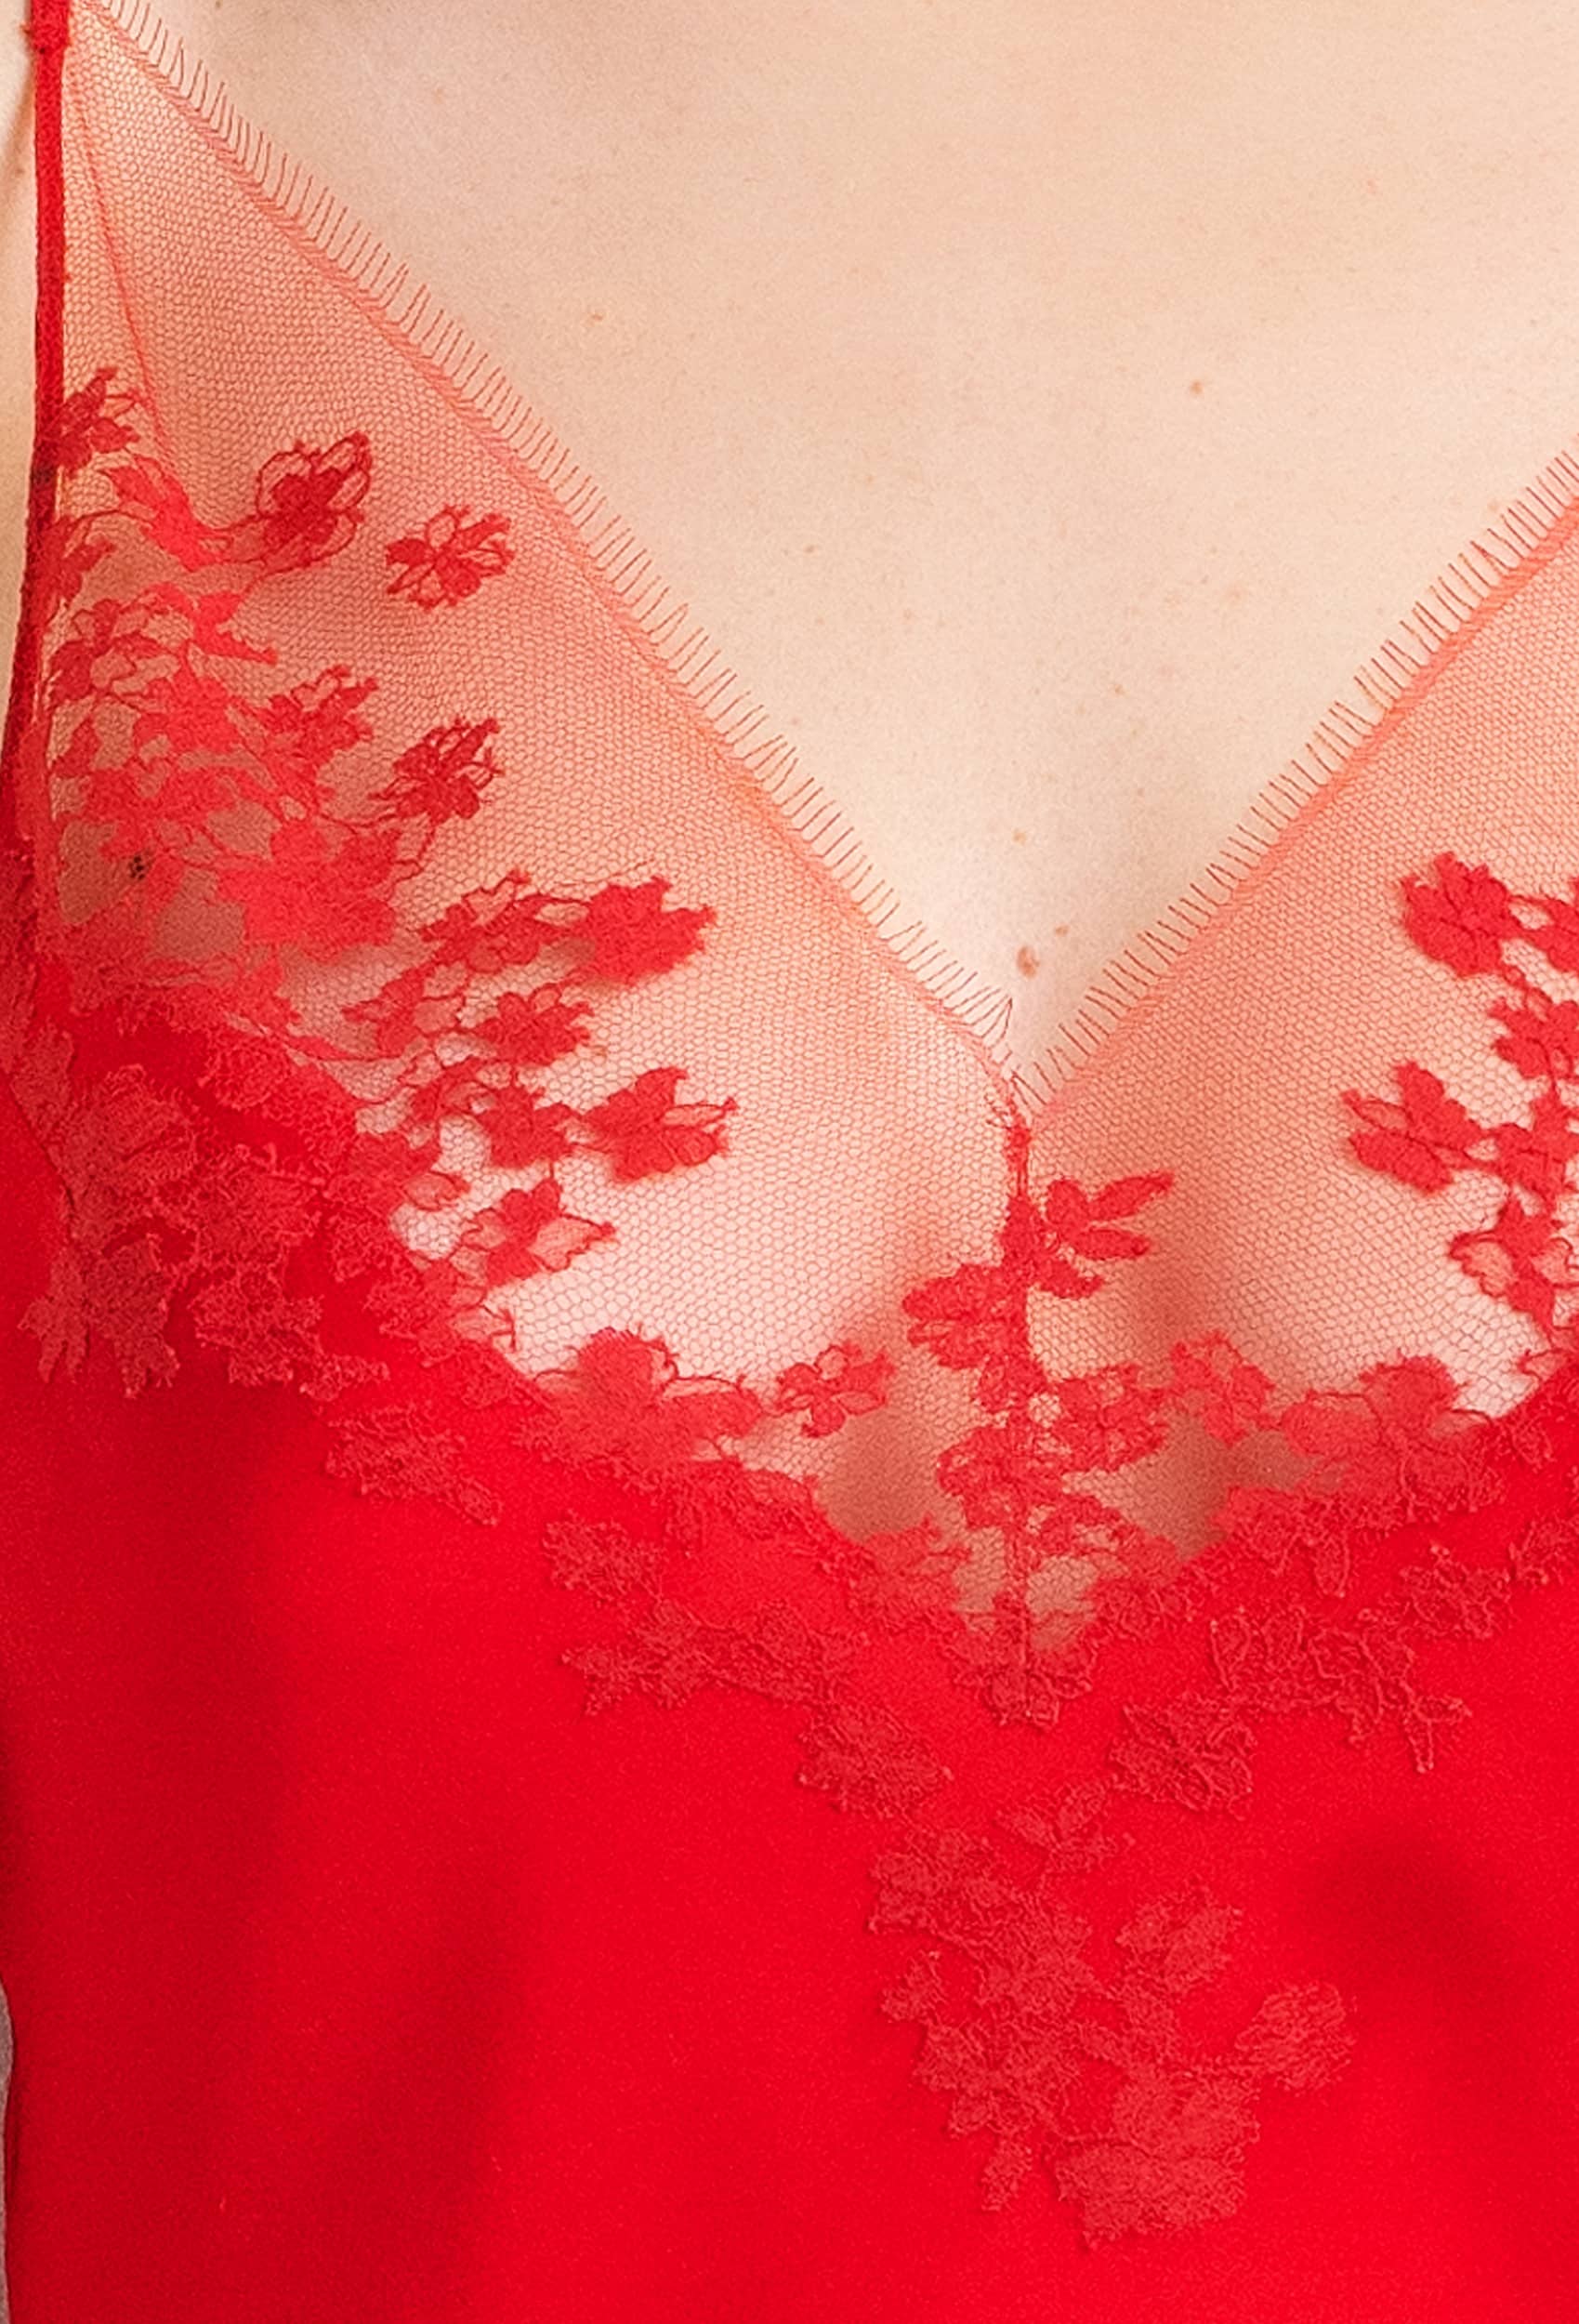 Silk camisole - red and red Sakura Caudry lace